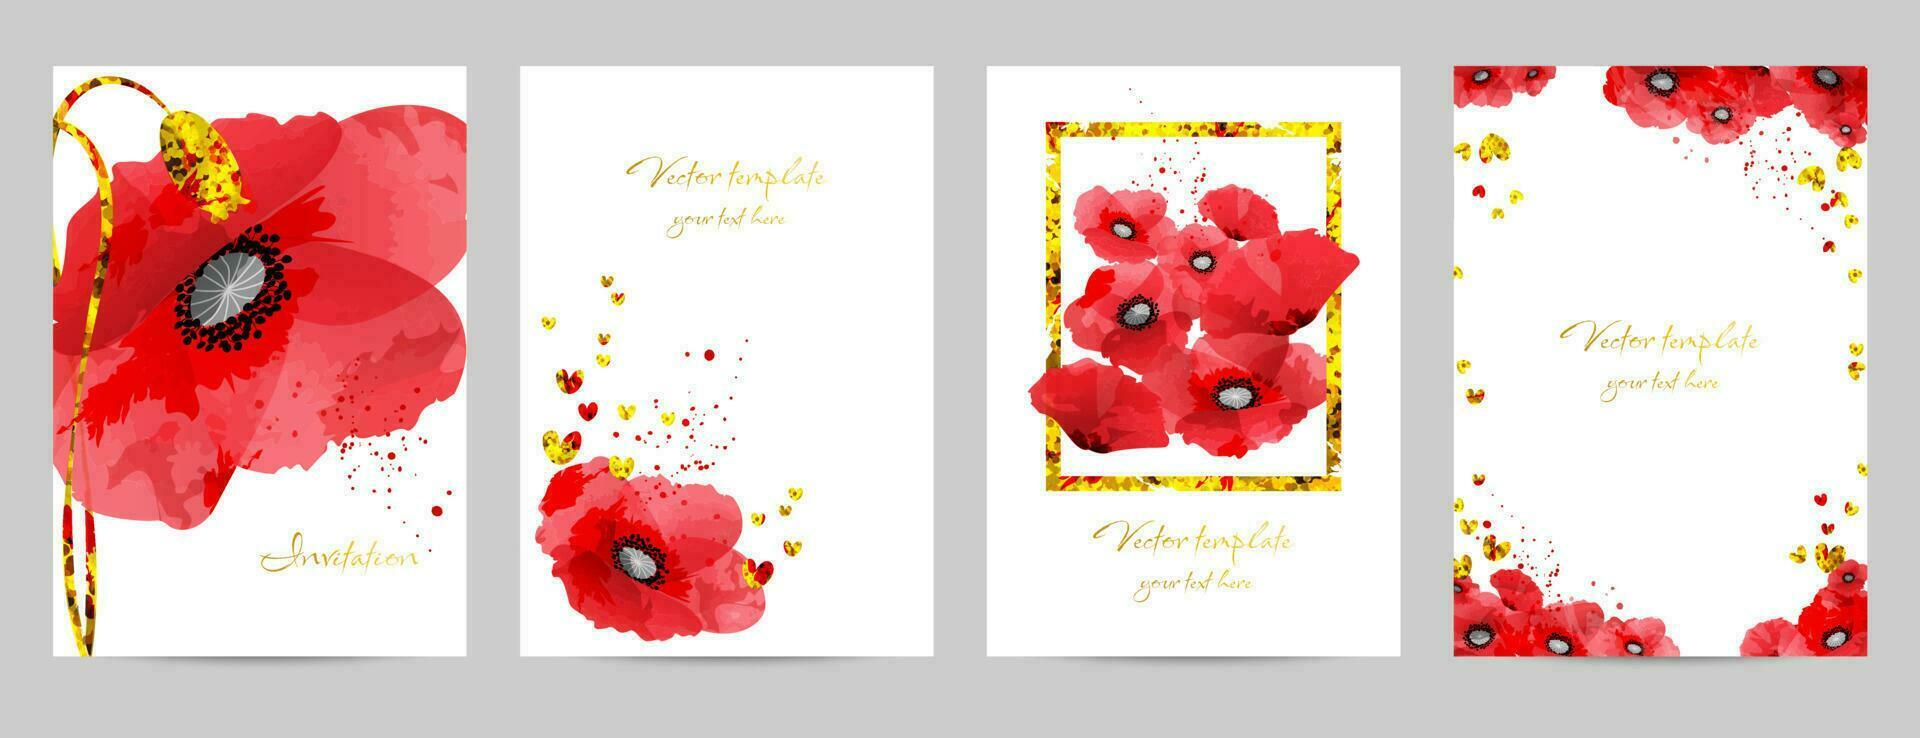 Luxury floral cover template. Background with red poppies and golden sparkles. Elegant watercolor design for banner, brochure, invitation. vector